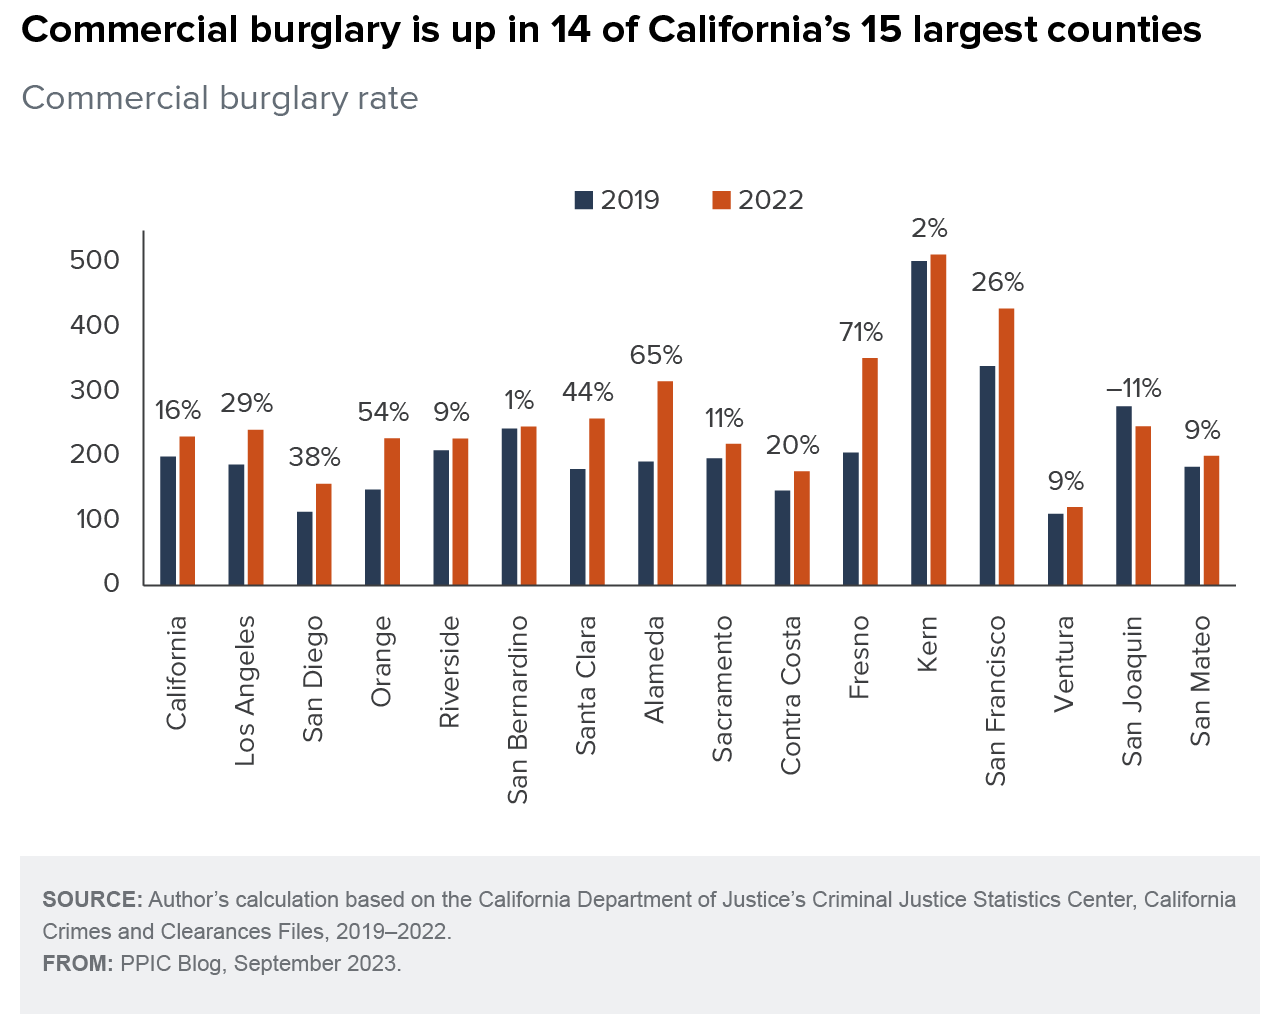 figure - Commercial burglary is up in 14 of California’s 15 largest counties